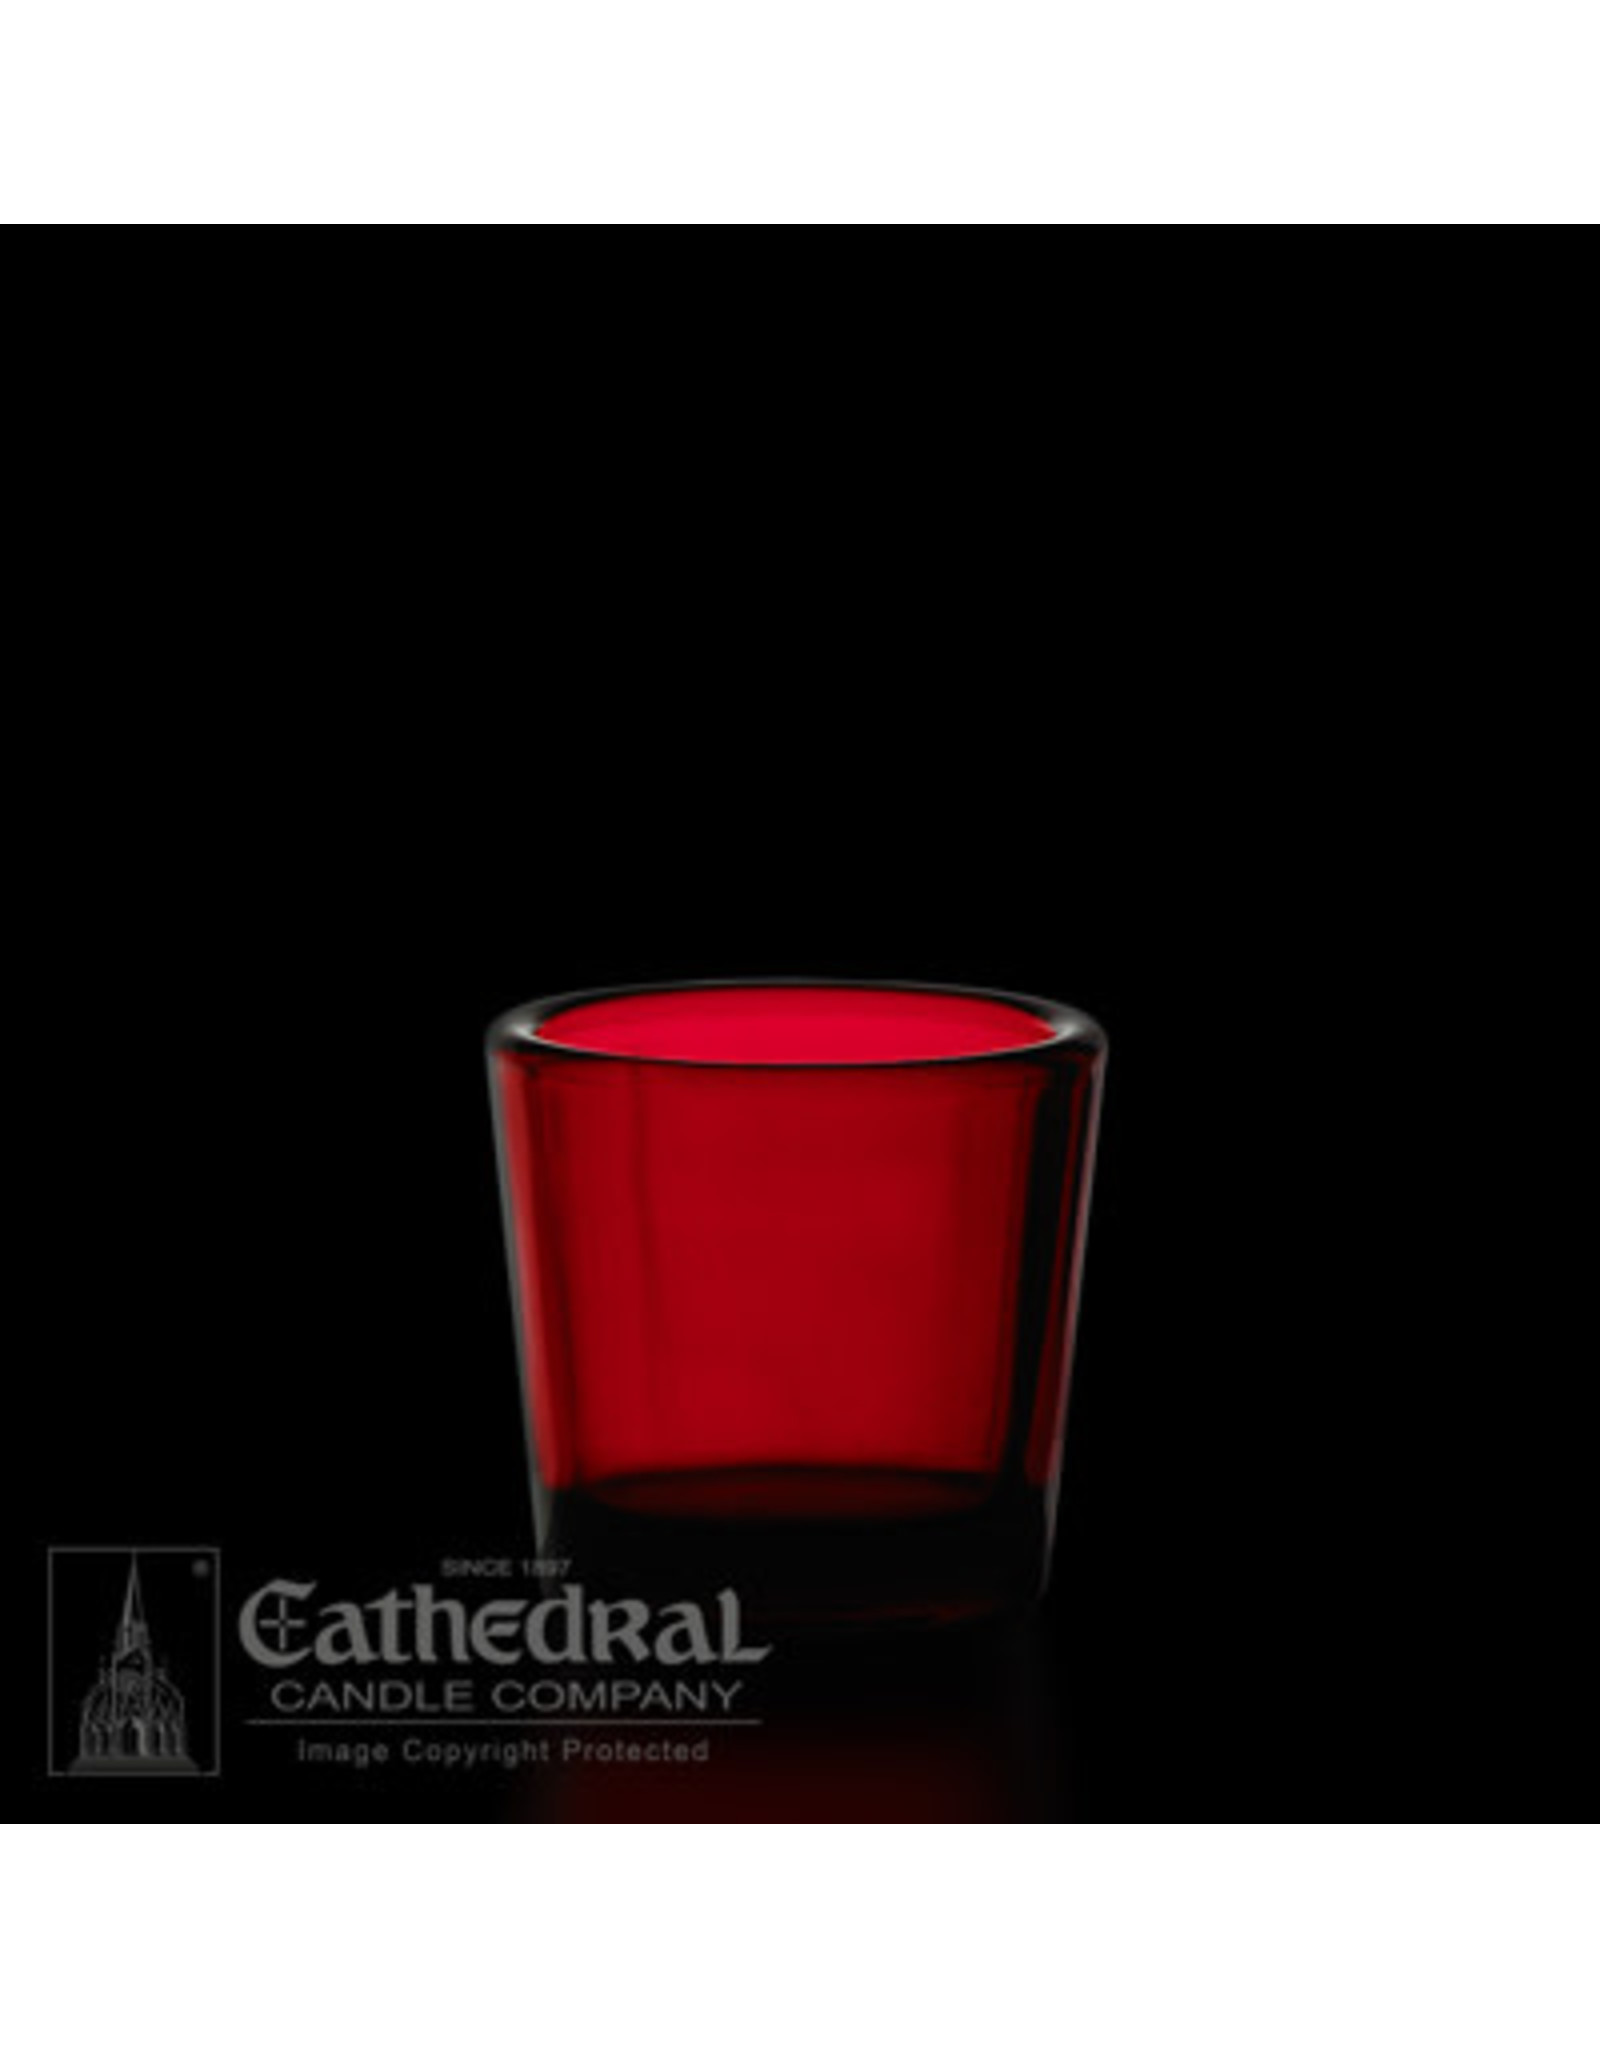 Cathedral Candle Votive Light Glasses - Ruby, 2-10 Hour (12)